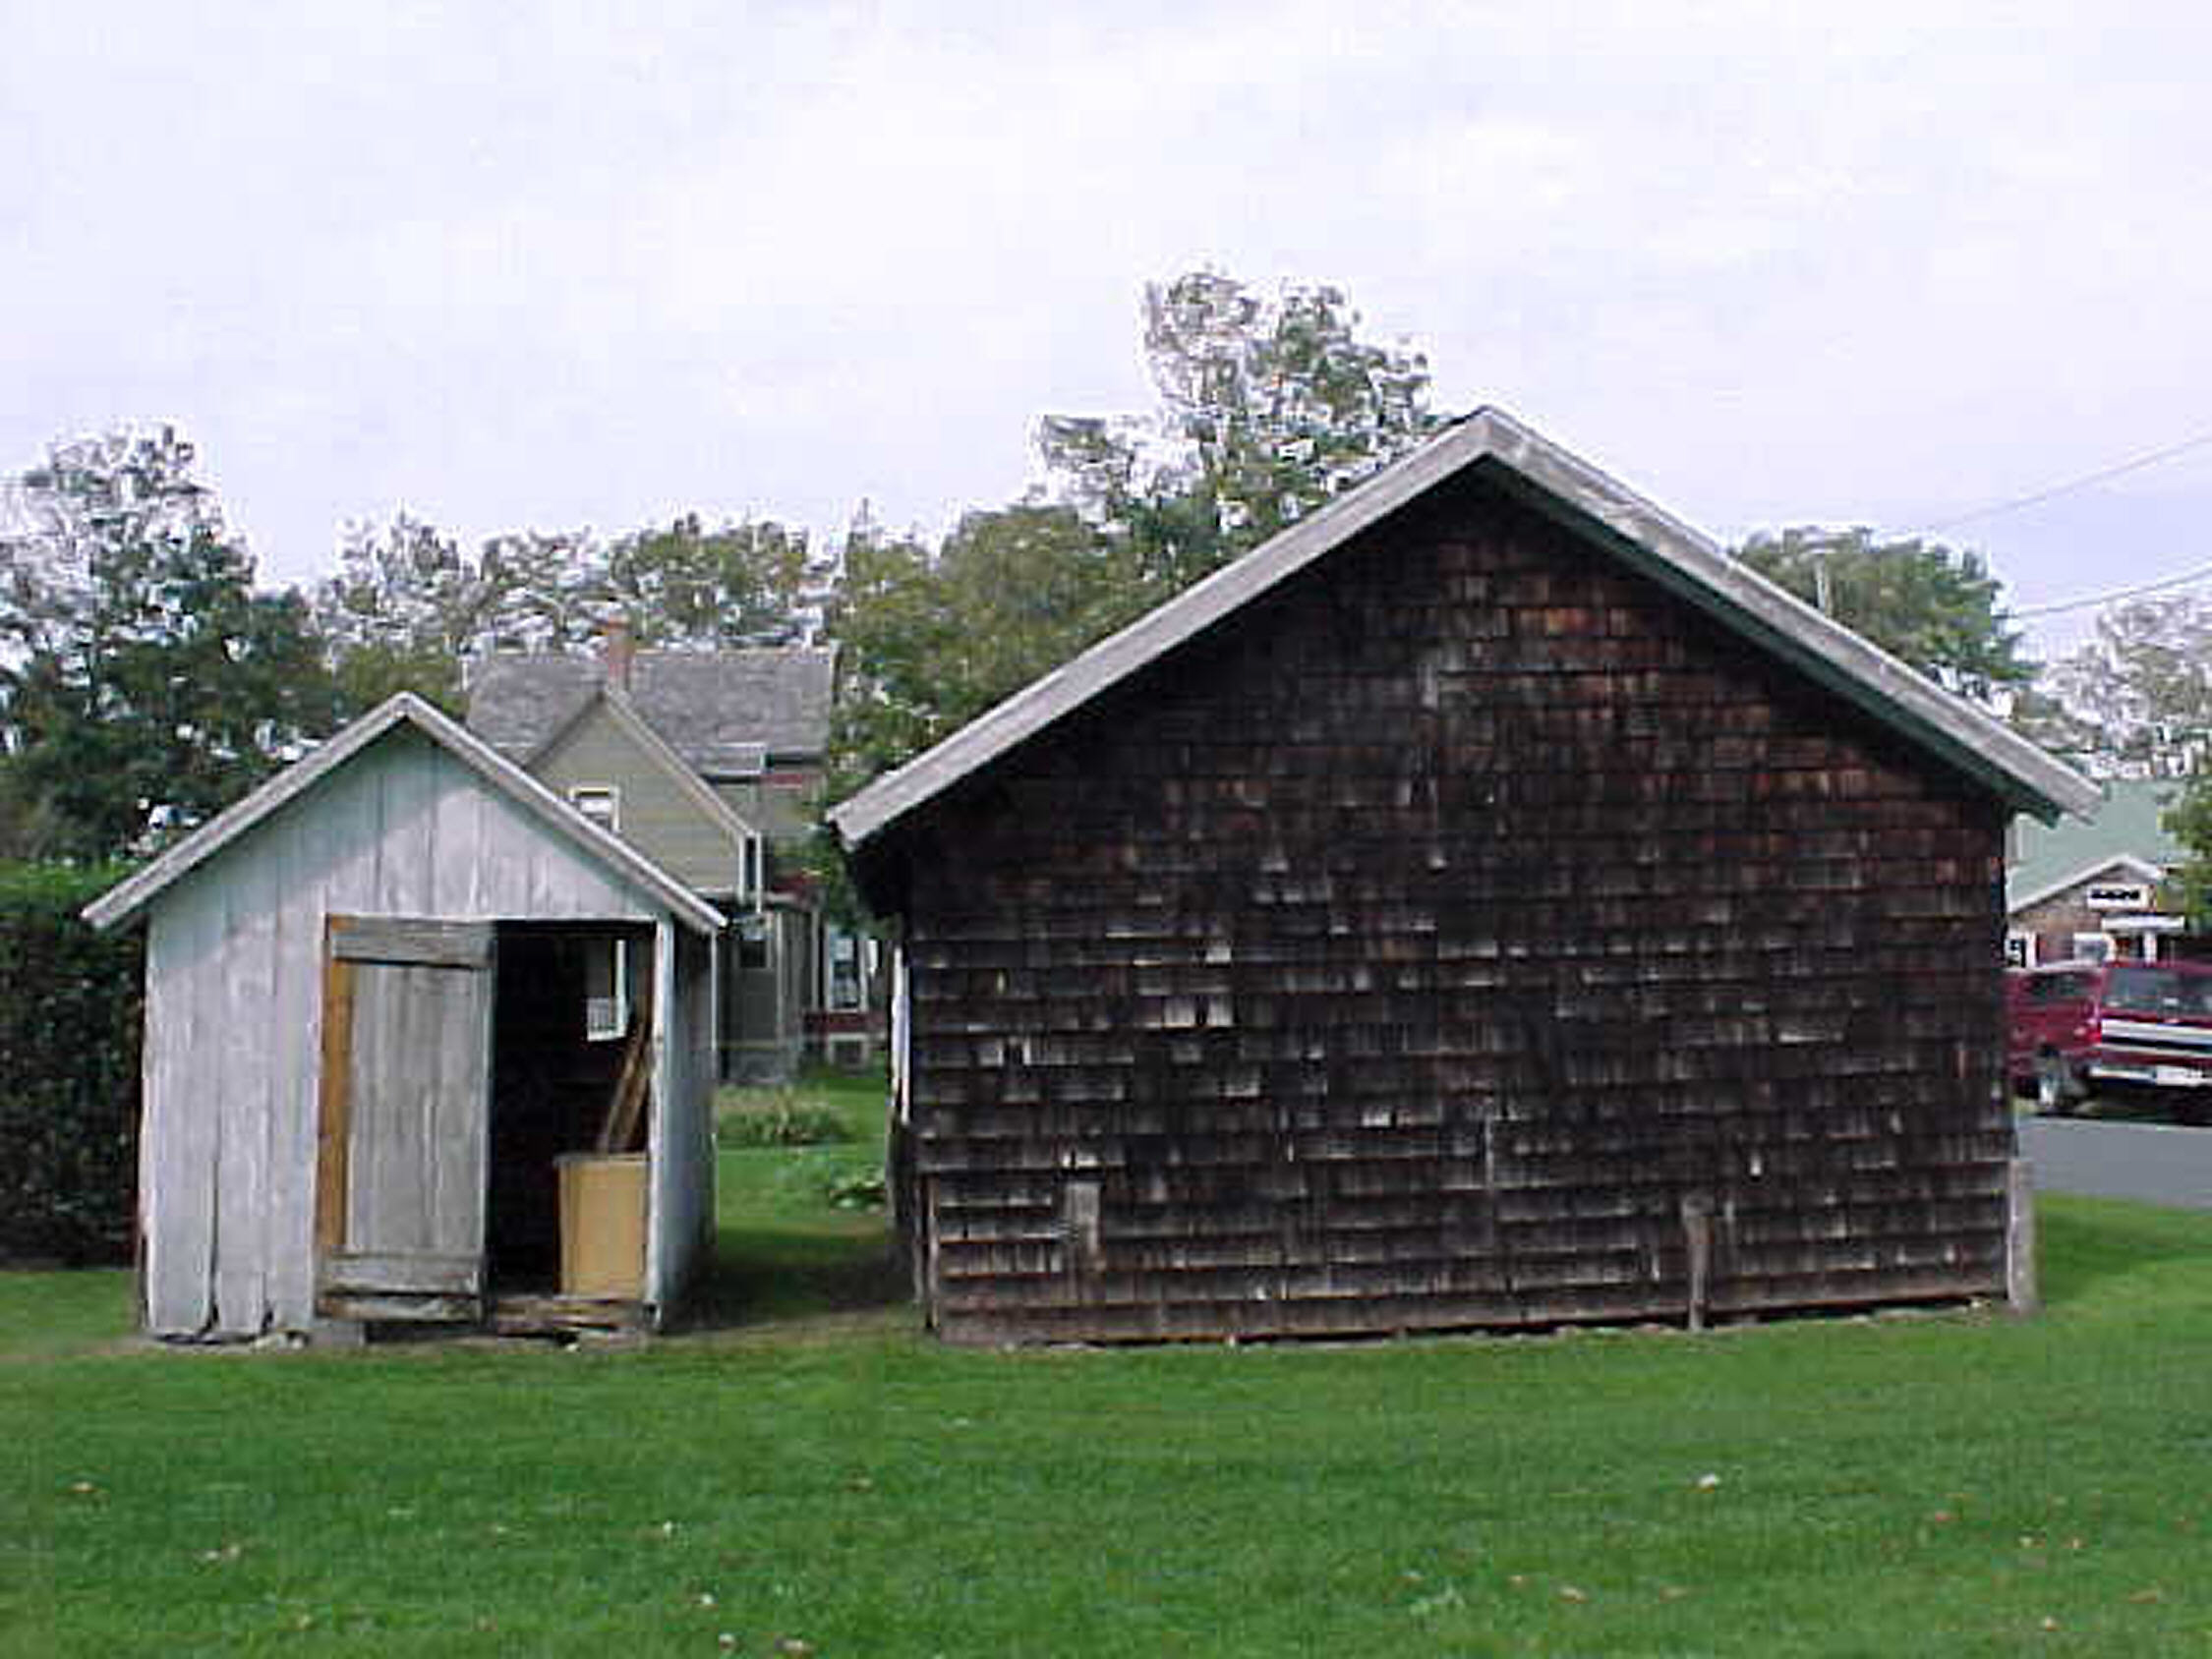  Shed and Barn before the renovation 